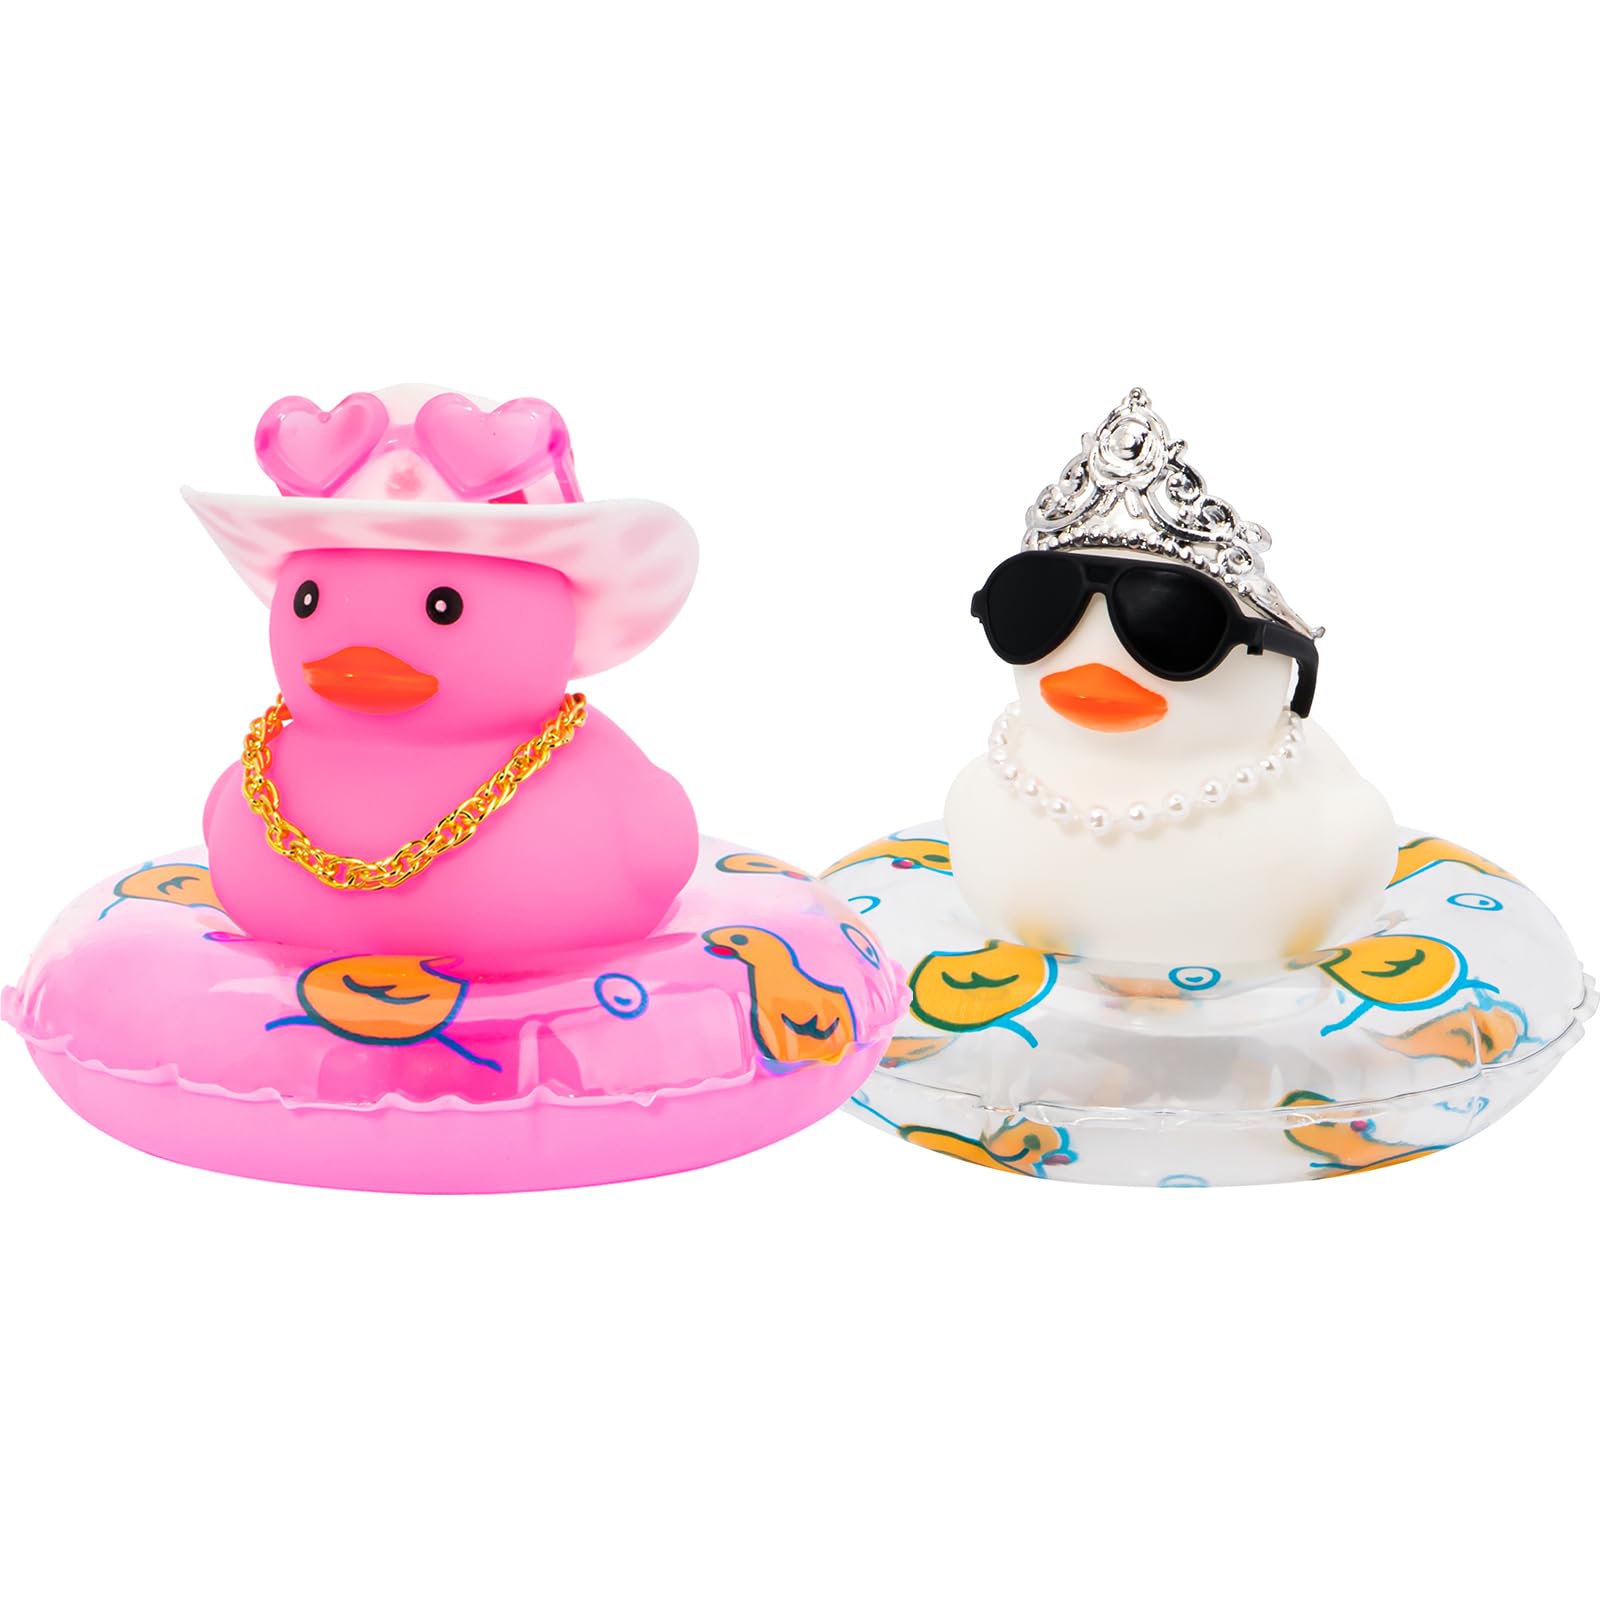 wonuu 2Pcs Rubber Duck, Cute Pink Love Heart Cowboy Hat Duck Dashboard Decoration and Queen Crown Pearl Necklace Duck Car Accessories, Surprising Birthday Gift Unique Table Decor Tiktok Duck